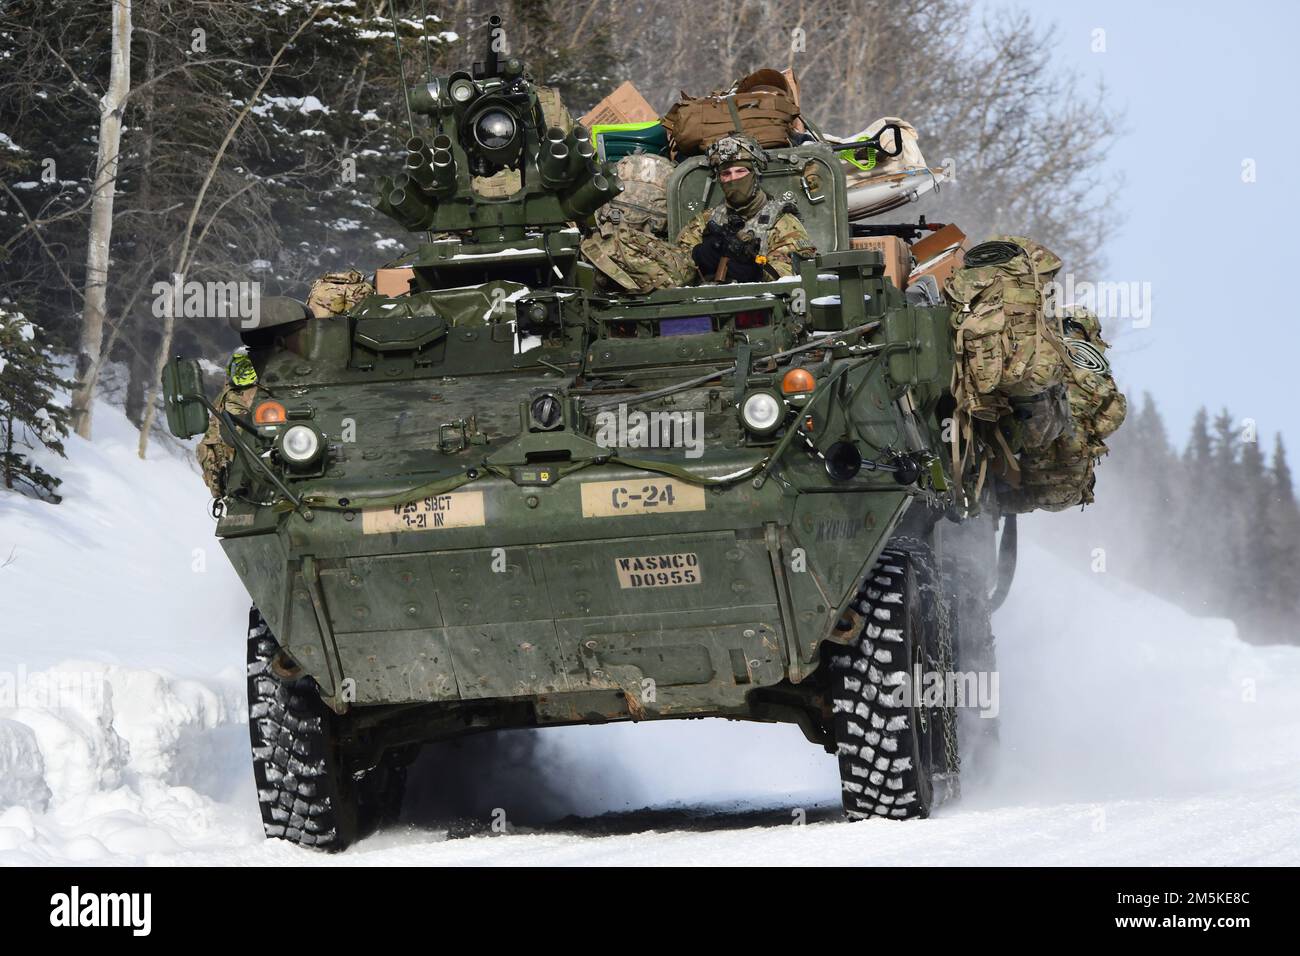 A Stryker vehicle from the 3rd Battalion, 21st Infantry Regiment moves down a snowy road in the Donnelly Training Area during Joint Pacific Multinational Readiness Center 22-02, March 22, 2022. This exercise is designed to validate U.S. Army Alaska’s 1st Stryker Brigade Combat Team, 25th Infantry Division’s cold weather training, readiness and capabilities.  (Army photo/John Pennell) Stock Photo